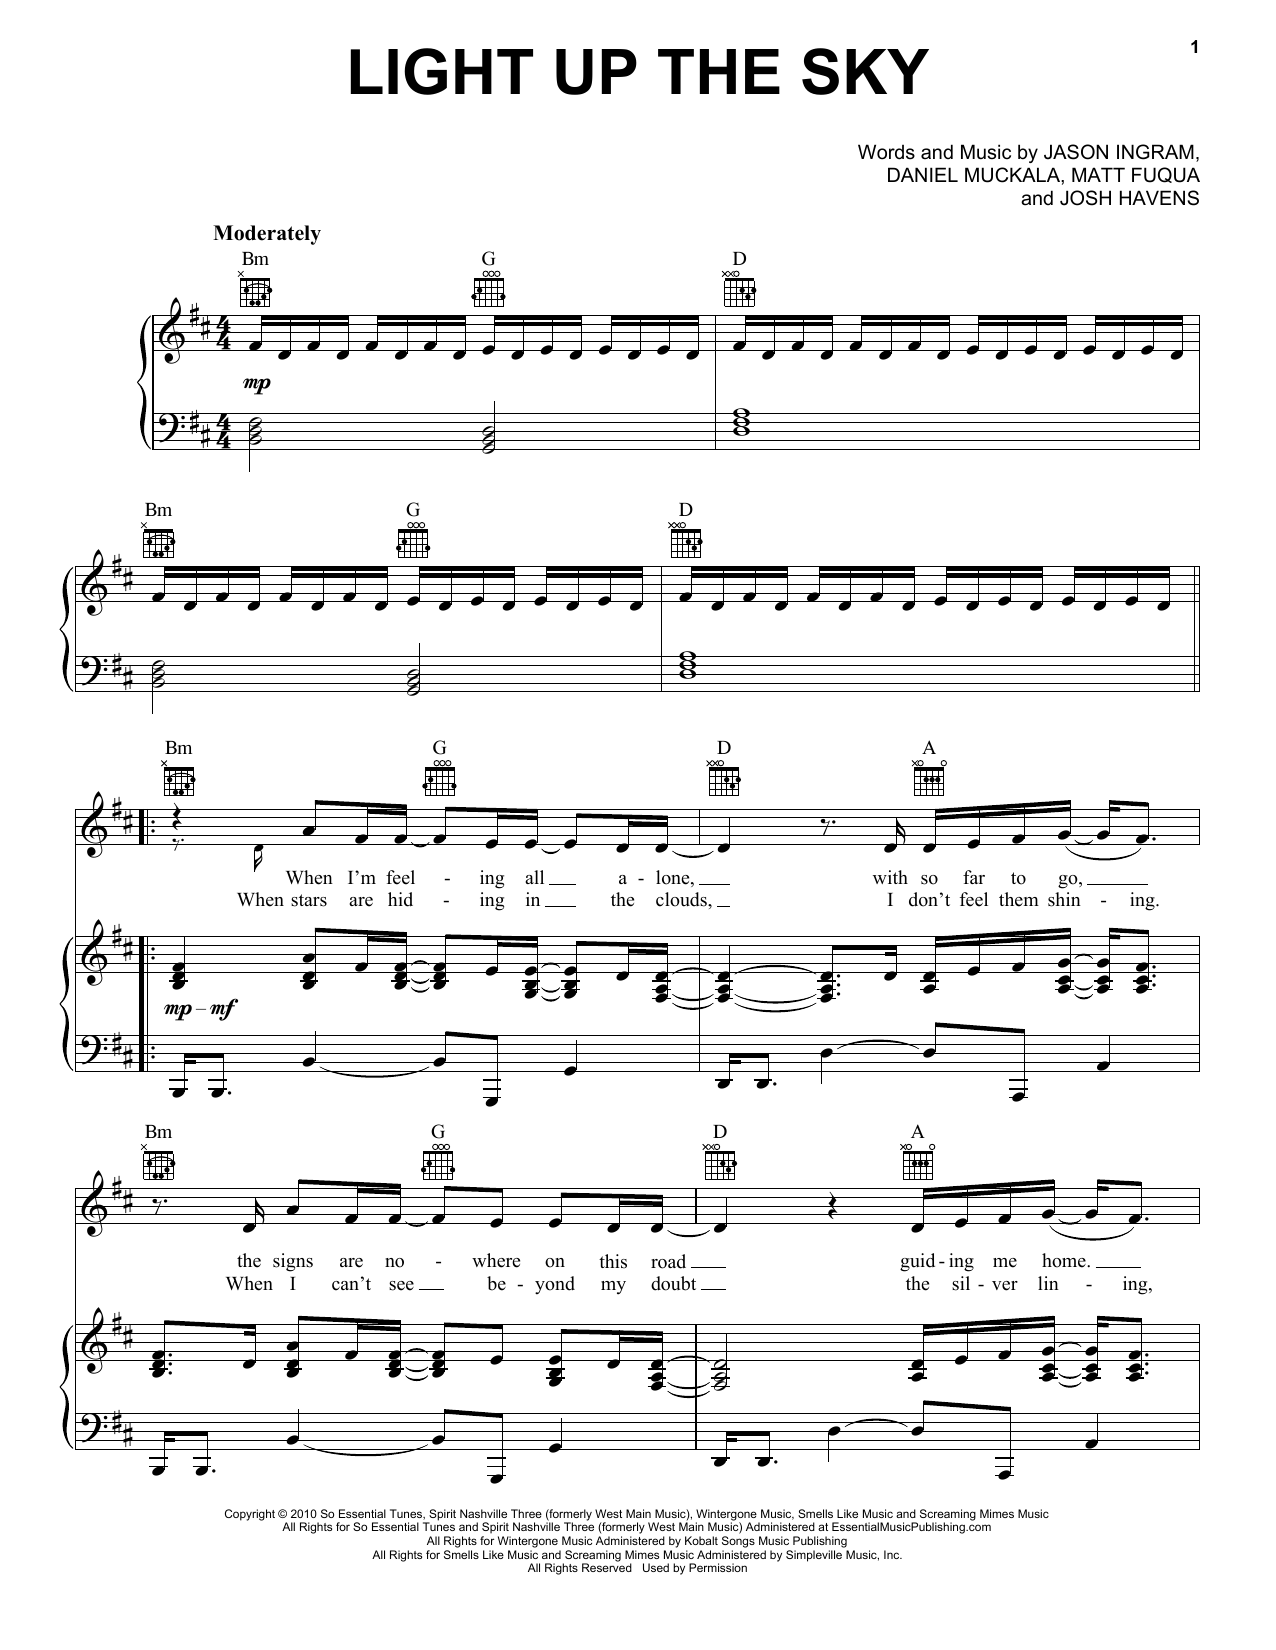 Download The Afters Light Up The Sky Sheet Music